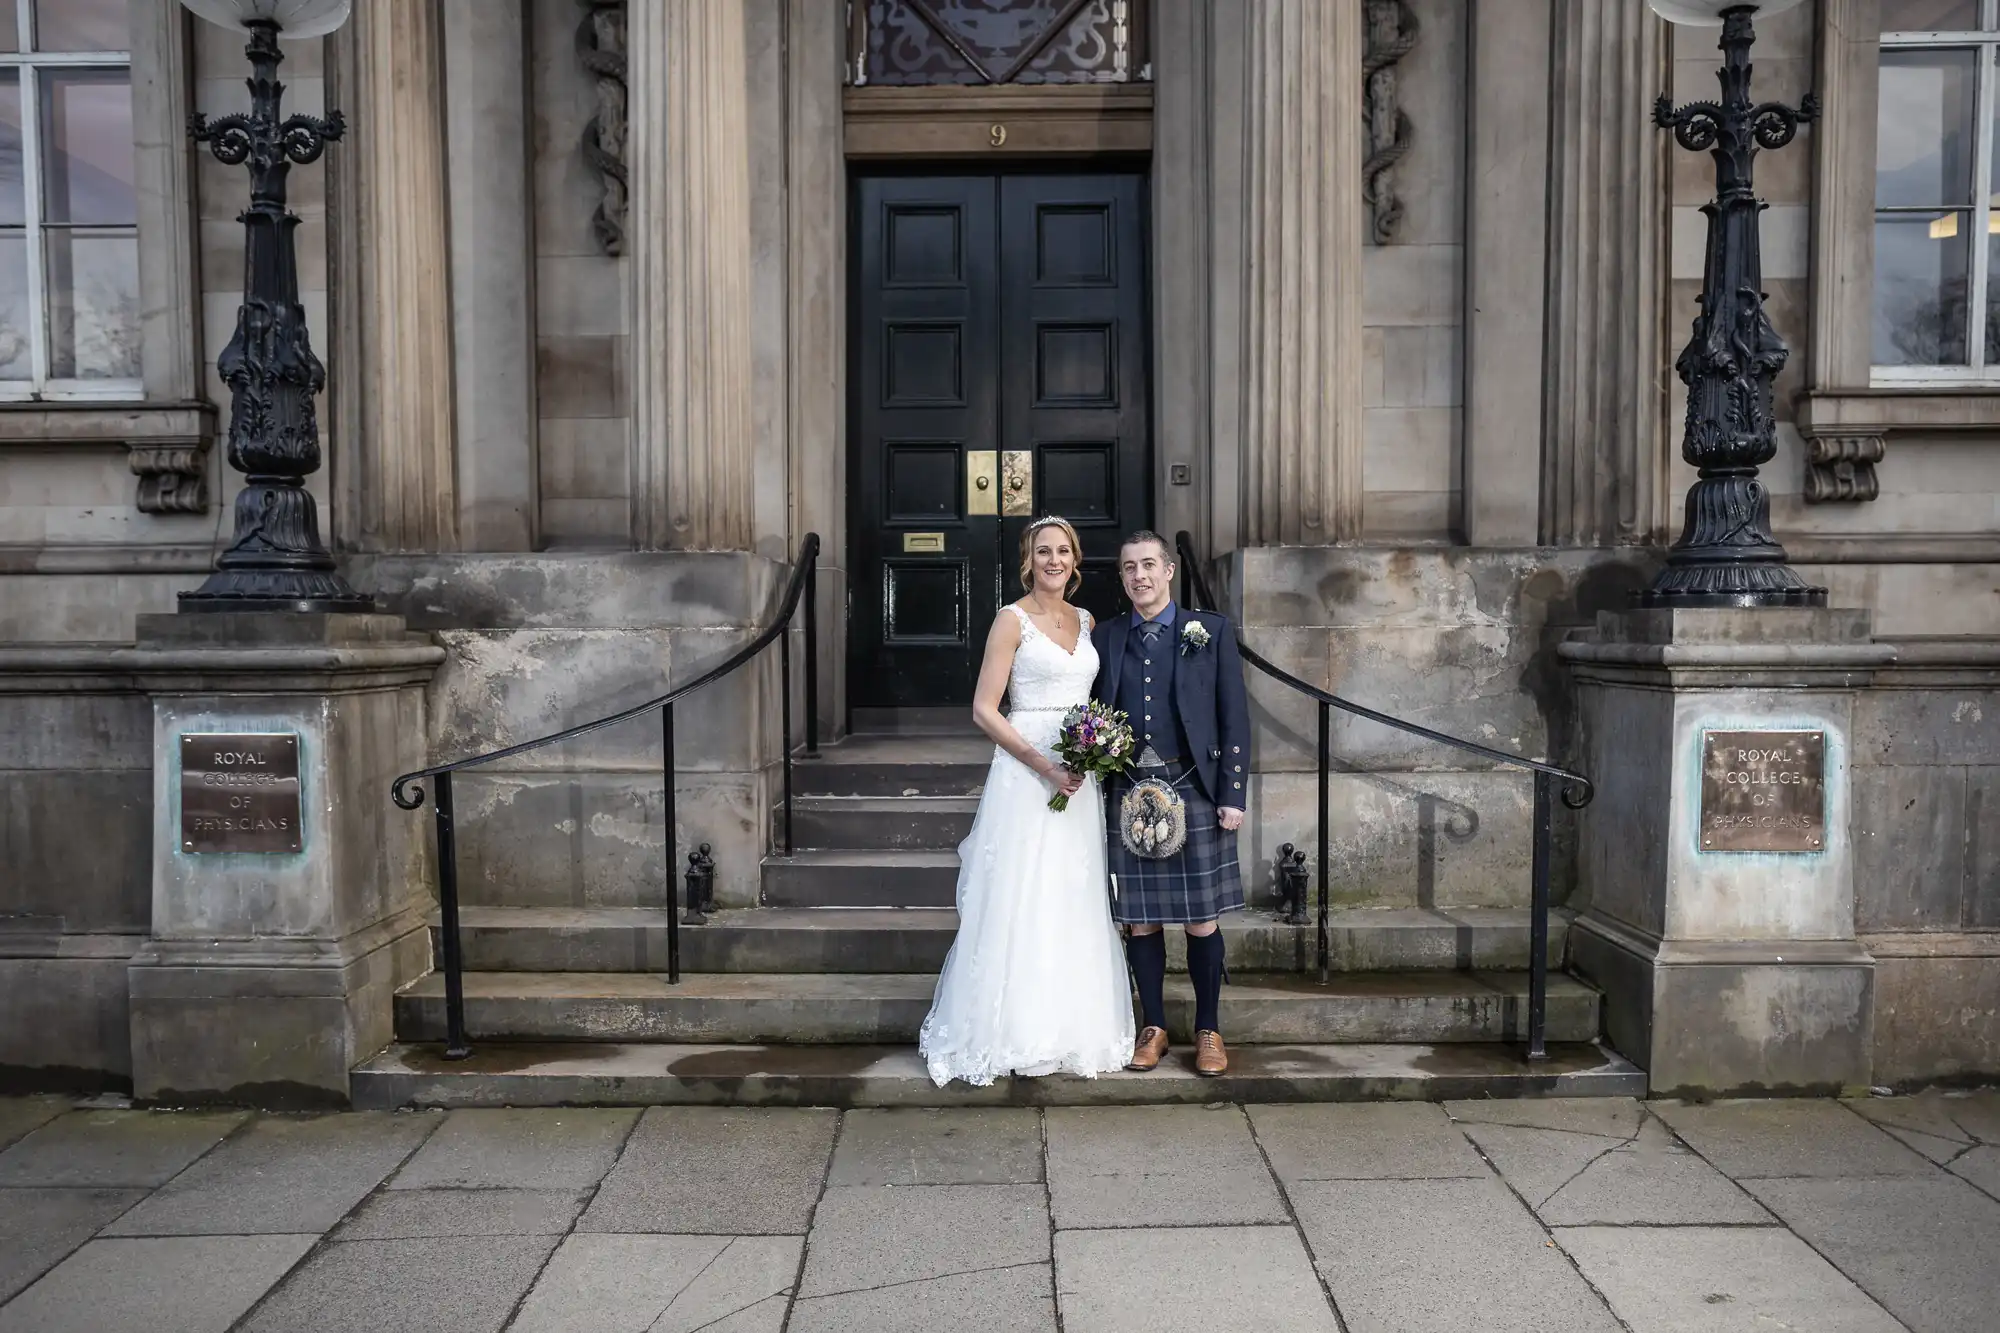 A bride in a white dress and a groom in a kilt stand side by side on the steps of an old building with large double doors and stone pillars.